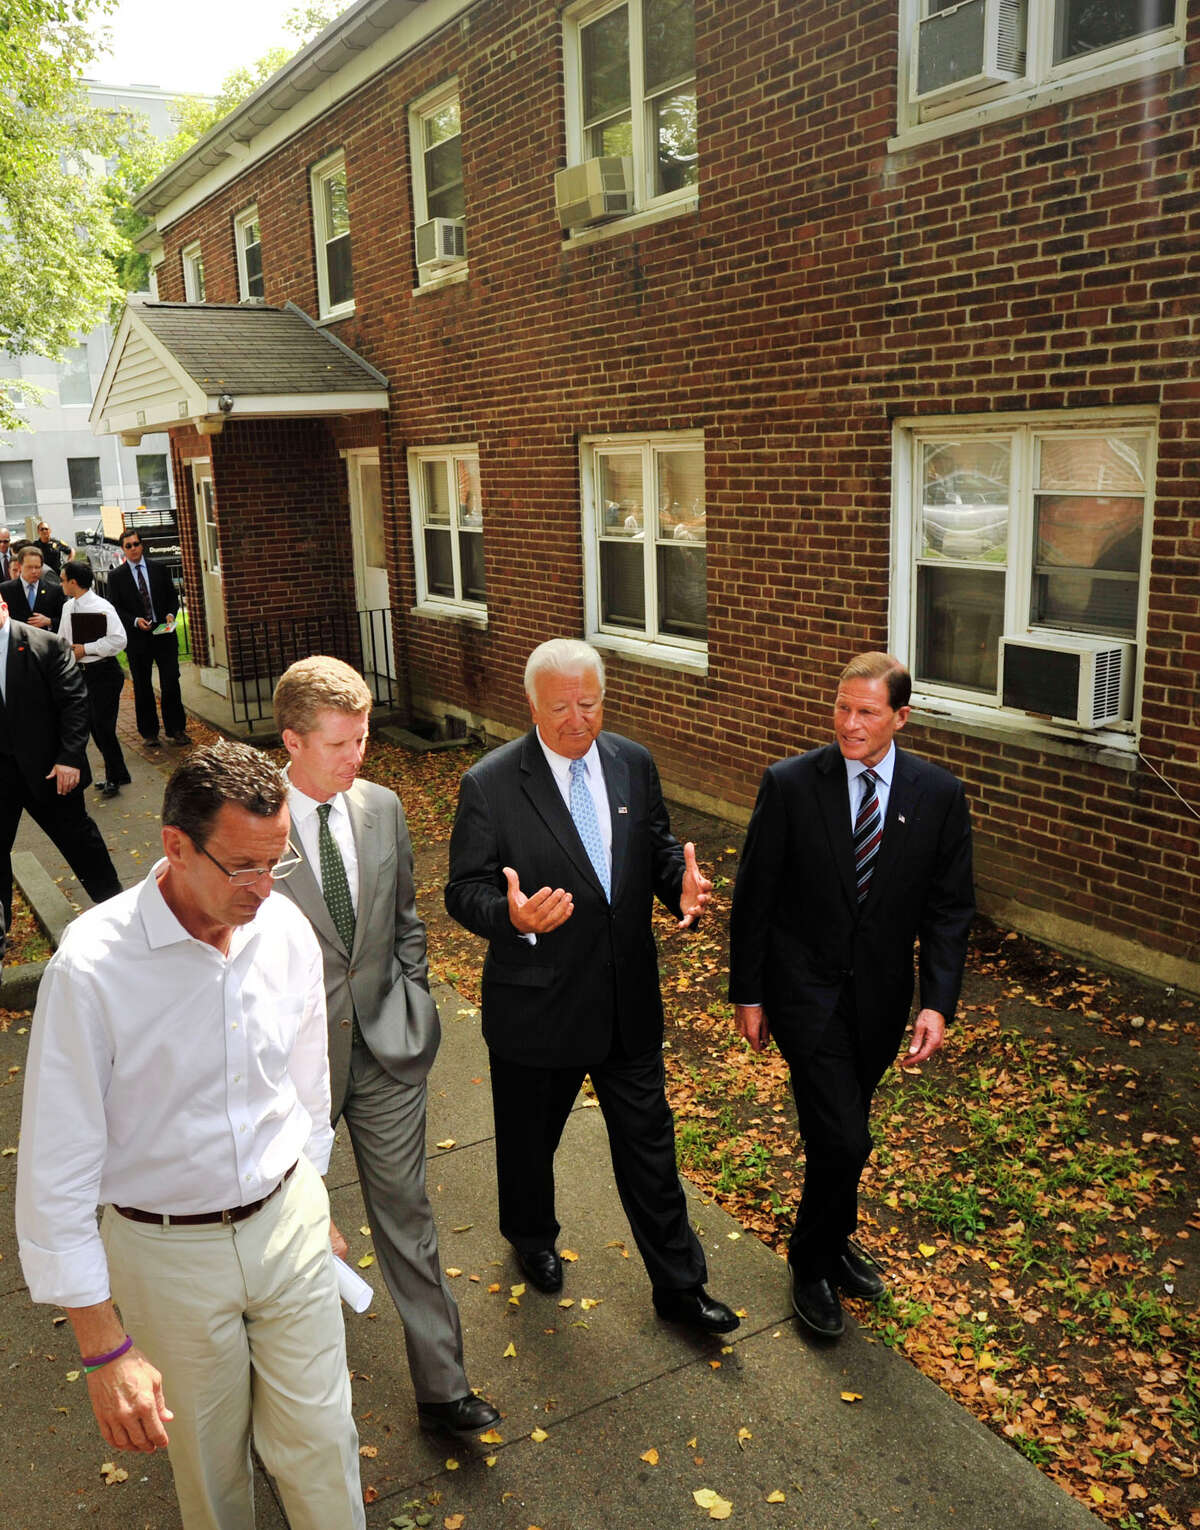 From left, Gov. Dannel P. Malloy, Secretary of Housing and Urban Development Shaun Donovan, Norwalk Mayor Richard Moccia and Sen. Richard Blumenthal tour the Washington Village housing project in Norwalk, Conn., on Monday, Aug 12, 2013. First floor residents from Washington Village received flooding due to the storm surge from storm Sandy. Government officials are proposing to demolish the current dwellings and replace them with a housing project that is elevated above the flood level.